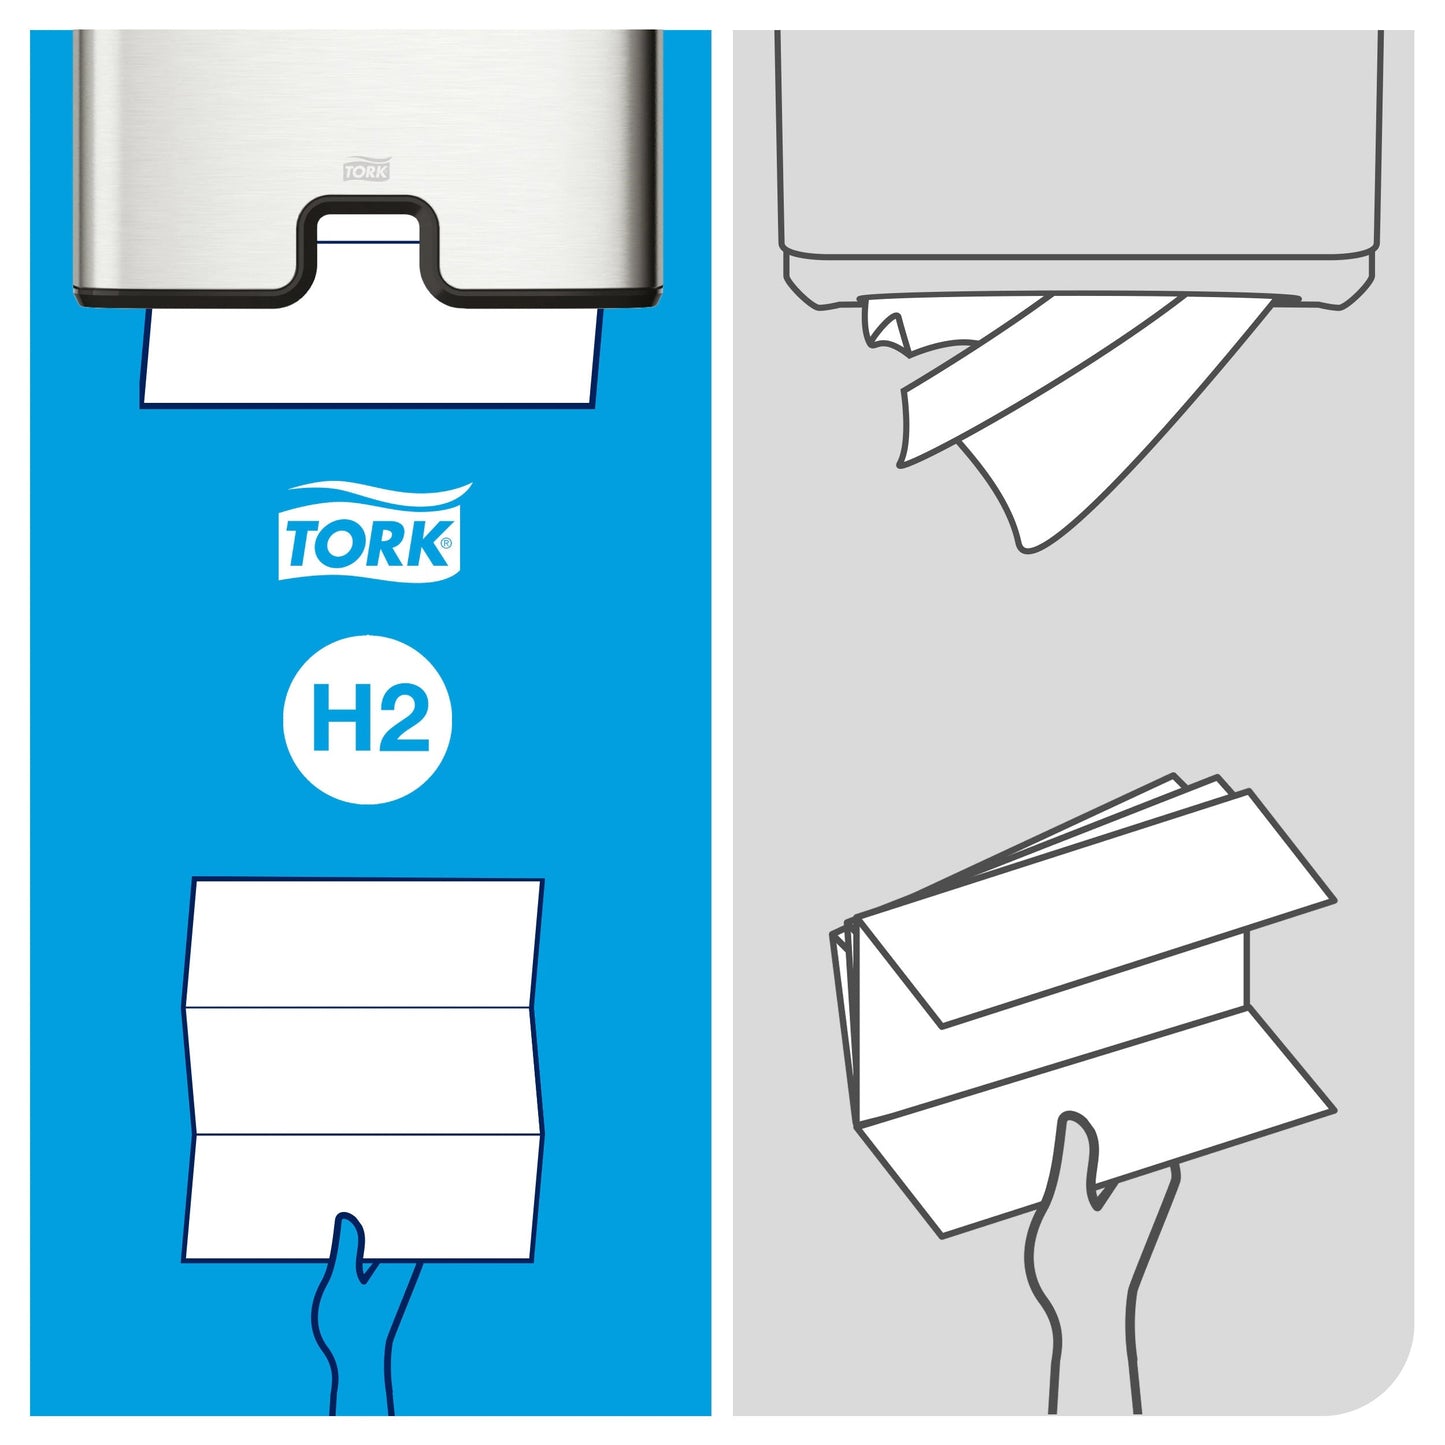 Tork Soft Multifold Hand Towel 2Ply - 130289 - Case of 21 x 180 Sheets